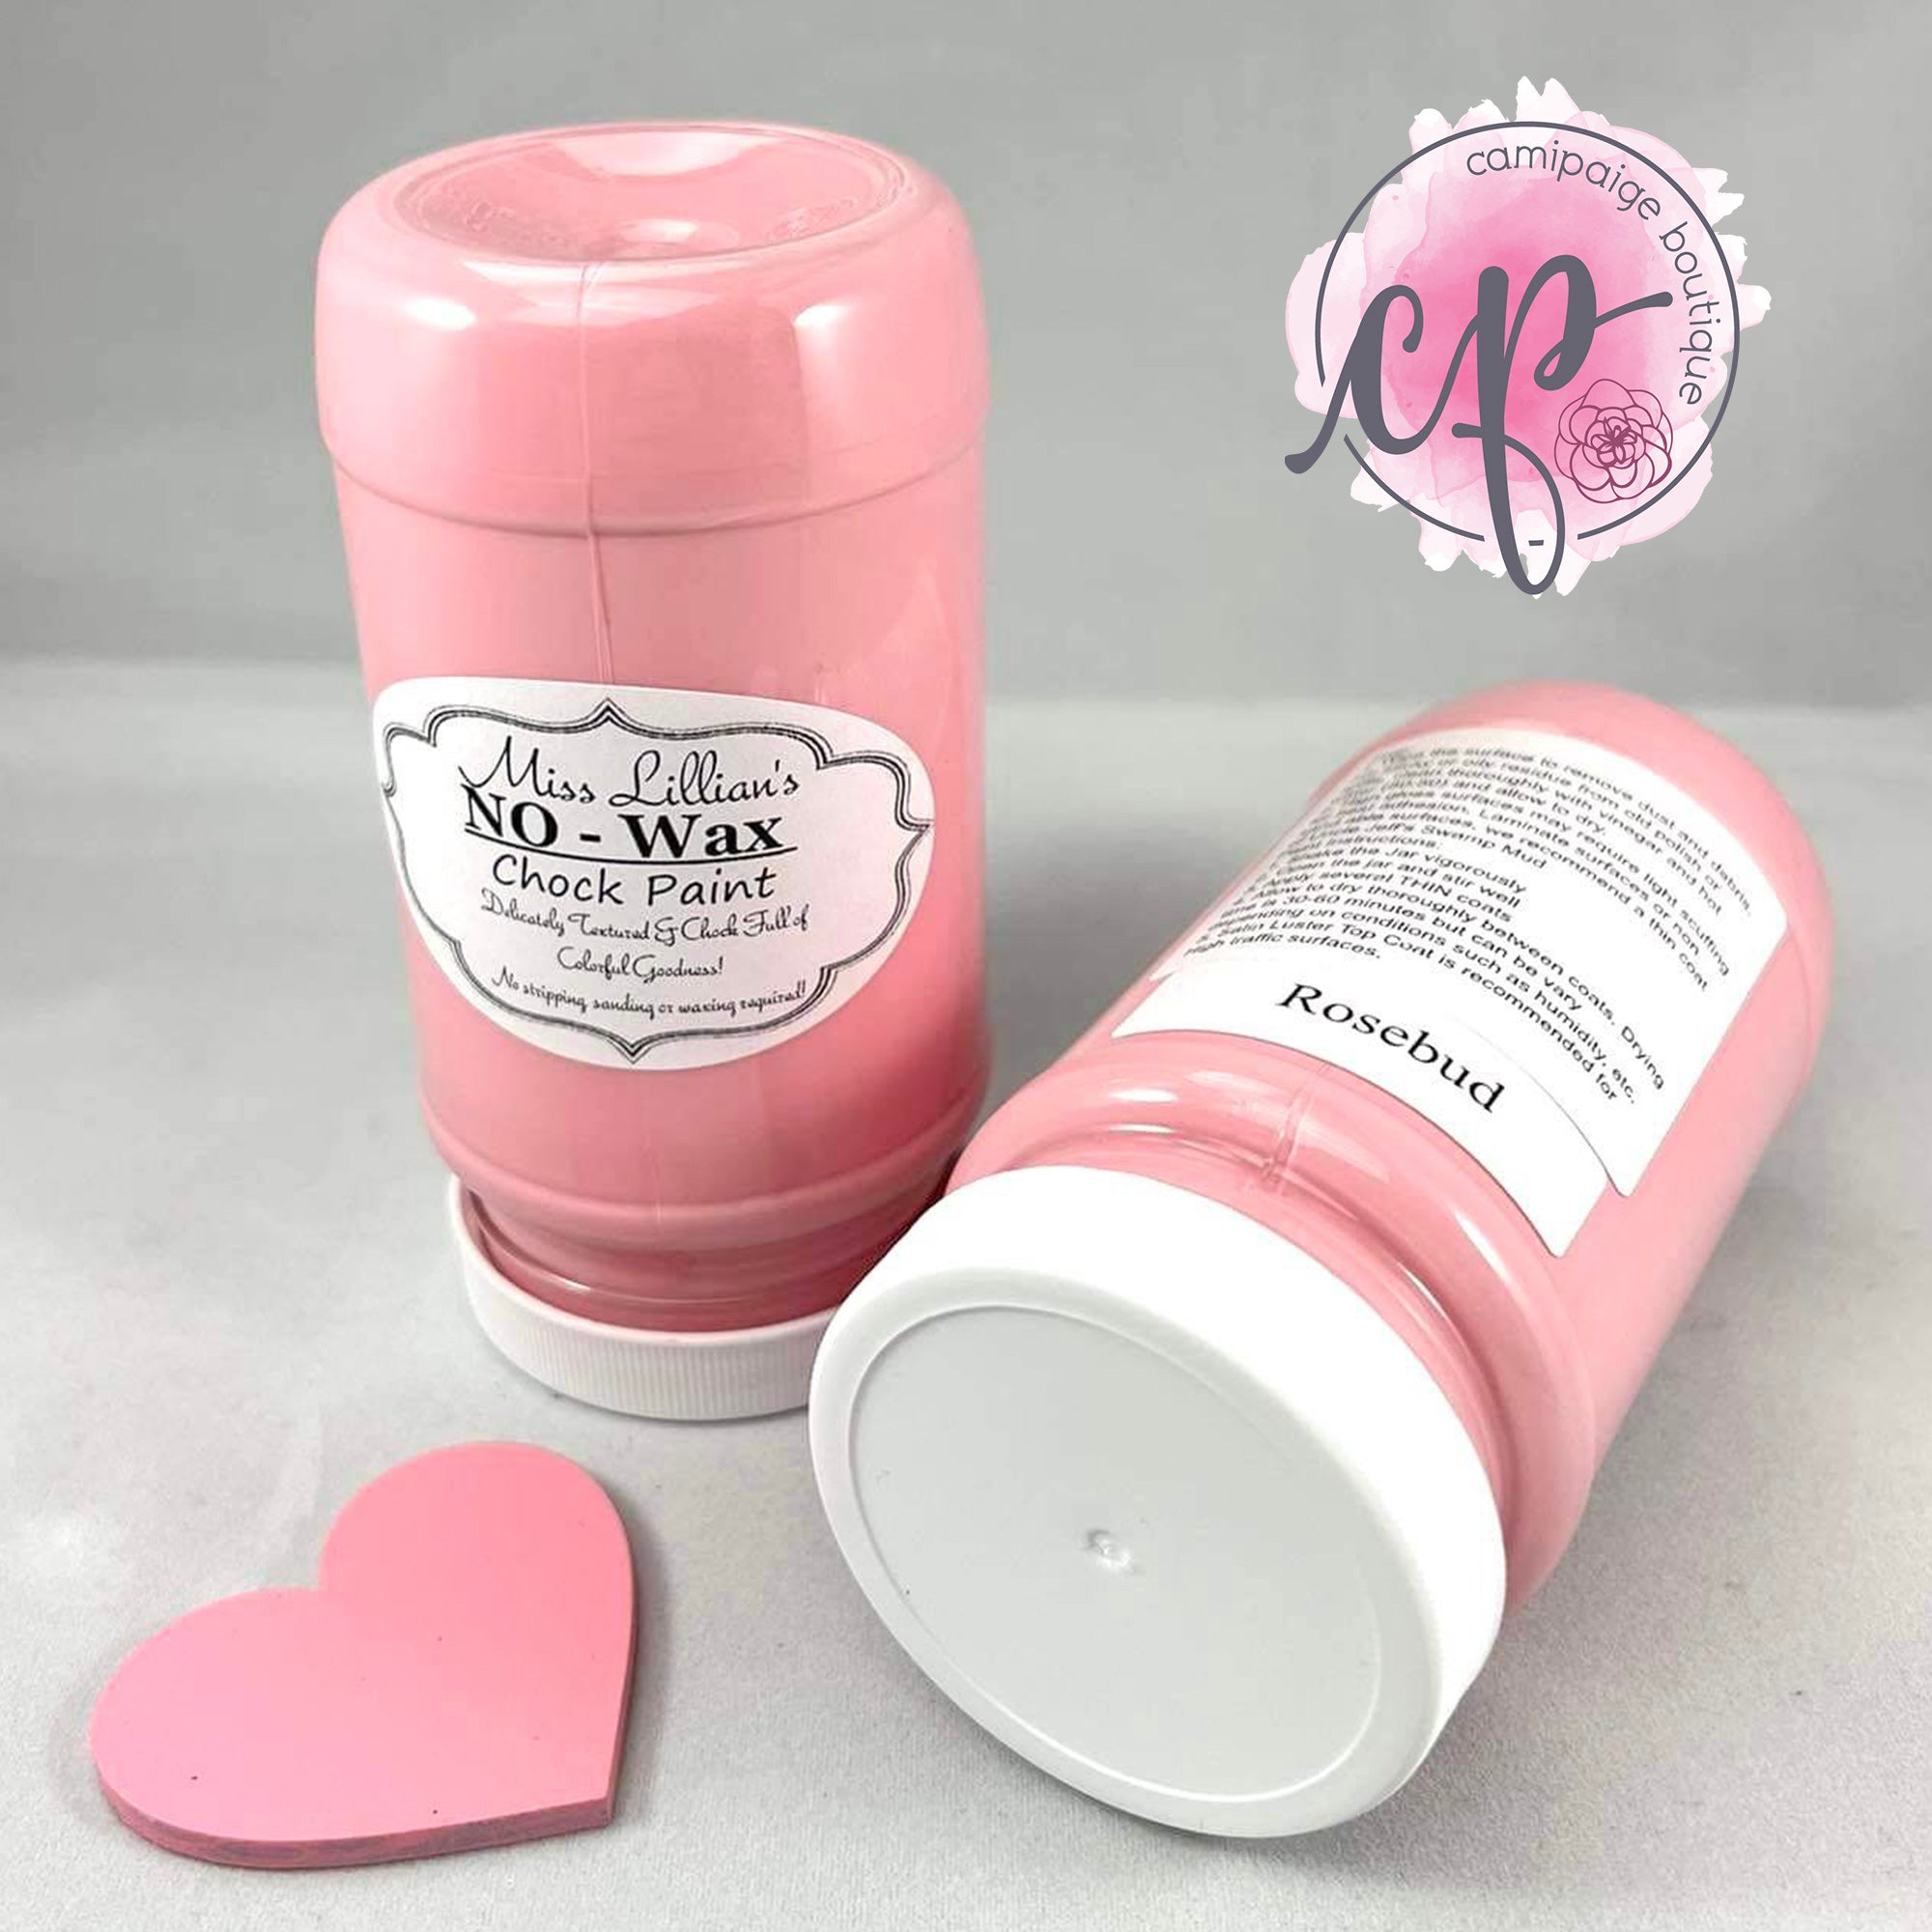 Perfect Pink and Red Chalk Paints  Miss Lillian's NO WAX Chock Paint